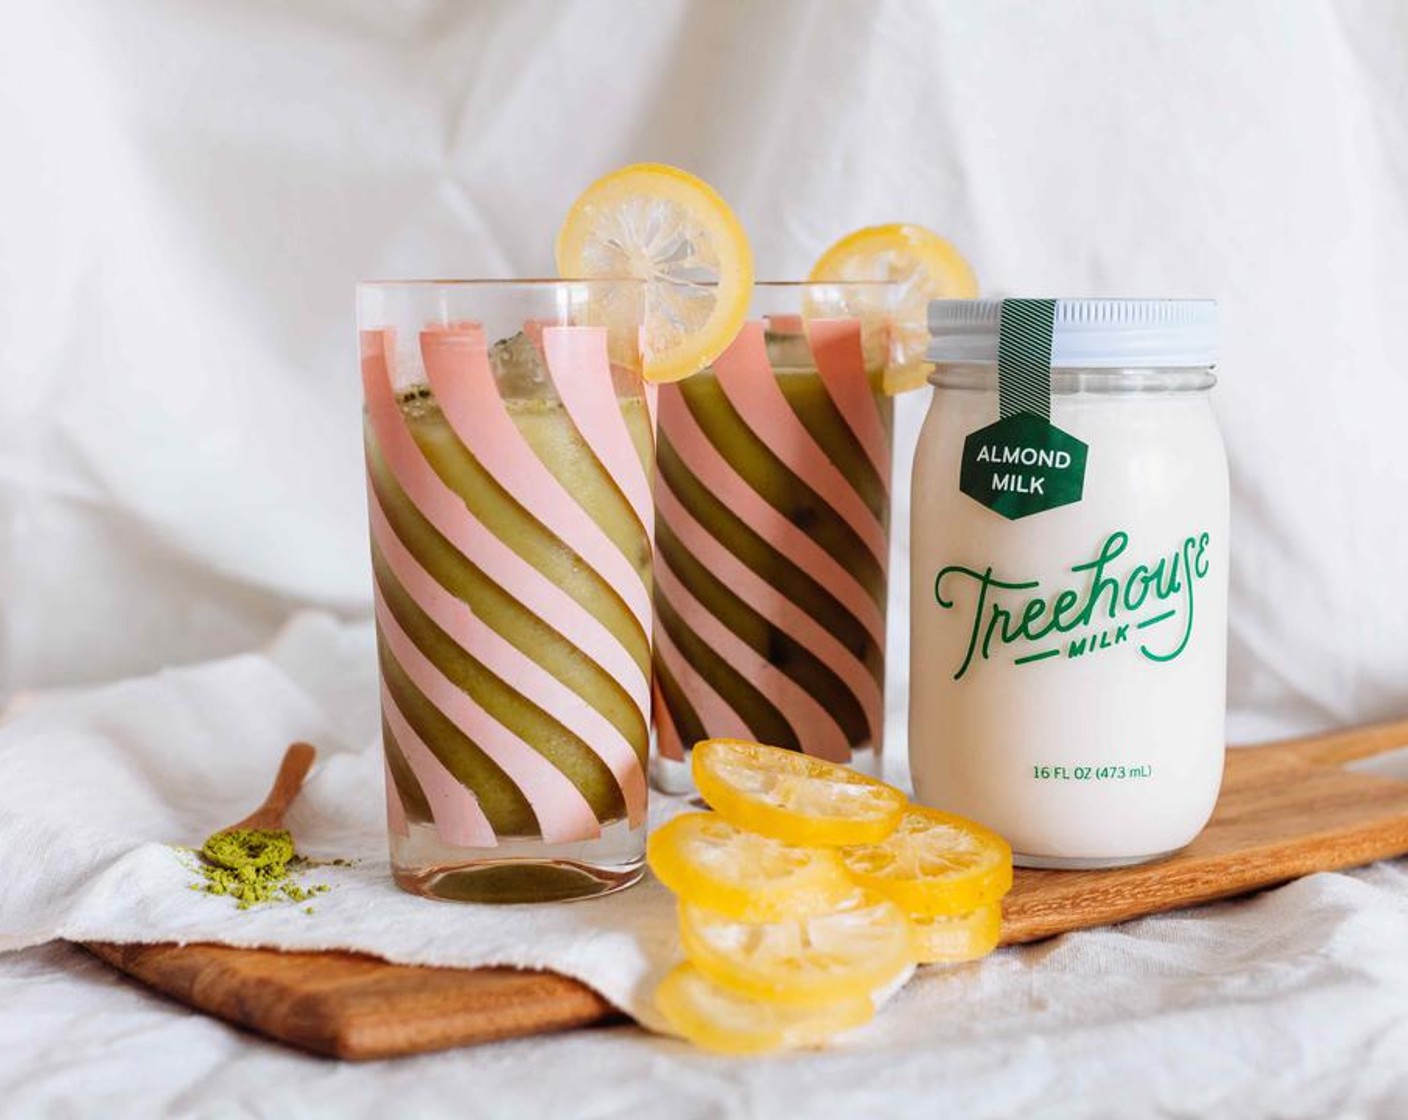 step 1 Combine Whiskey (1 fl oz), juice from Lemon (1), Matcha Powder (1/4 tsp) and Honey (1/2 Tbsp) and shake vigorously. Pour into an ice-filled highball glass. Top with Almond Milk (3 fl oz) and garnish with a Lemon slice.